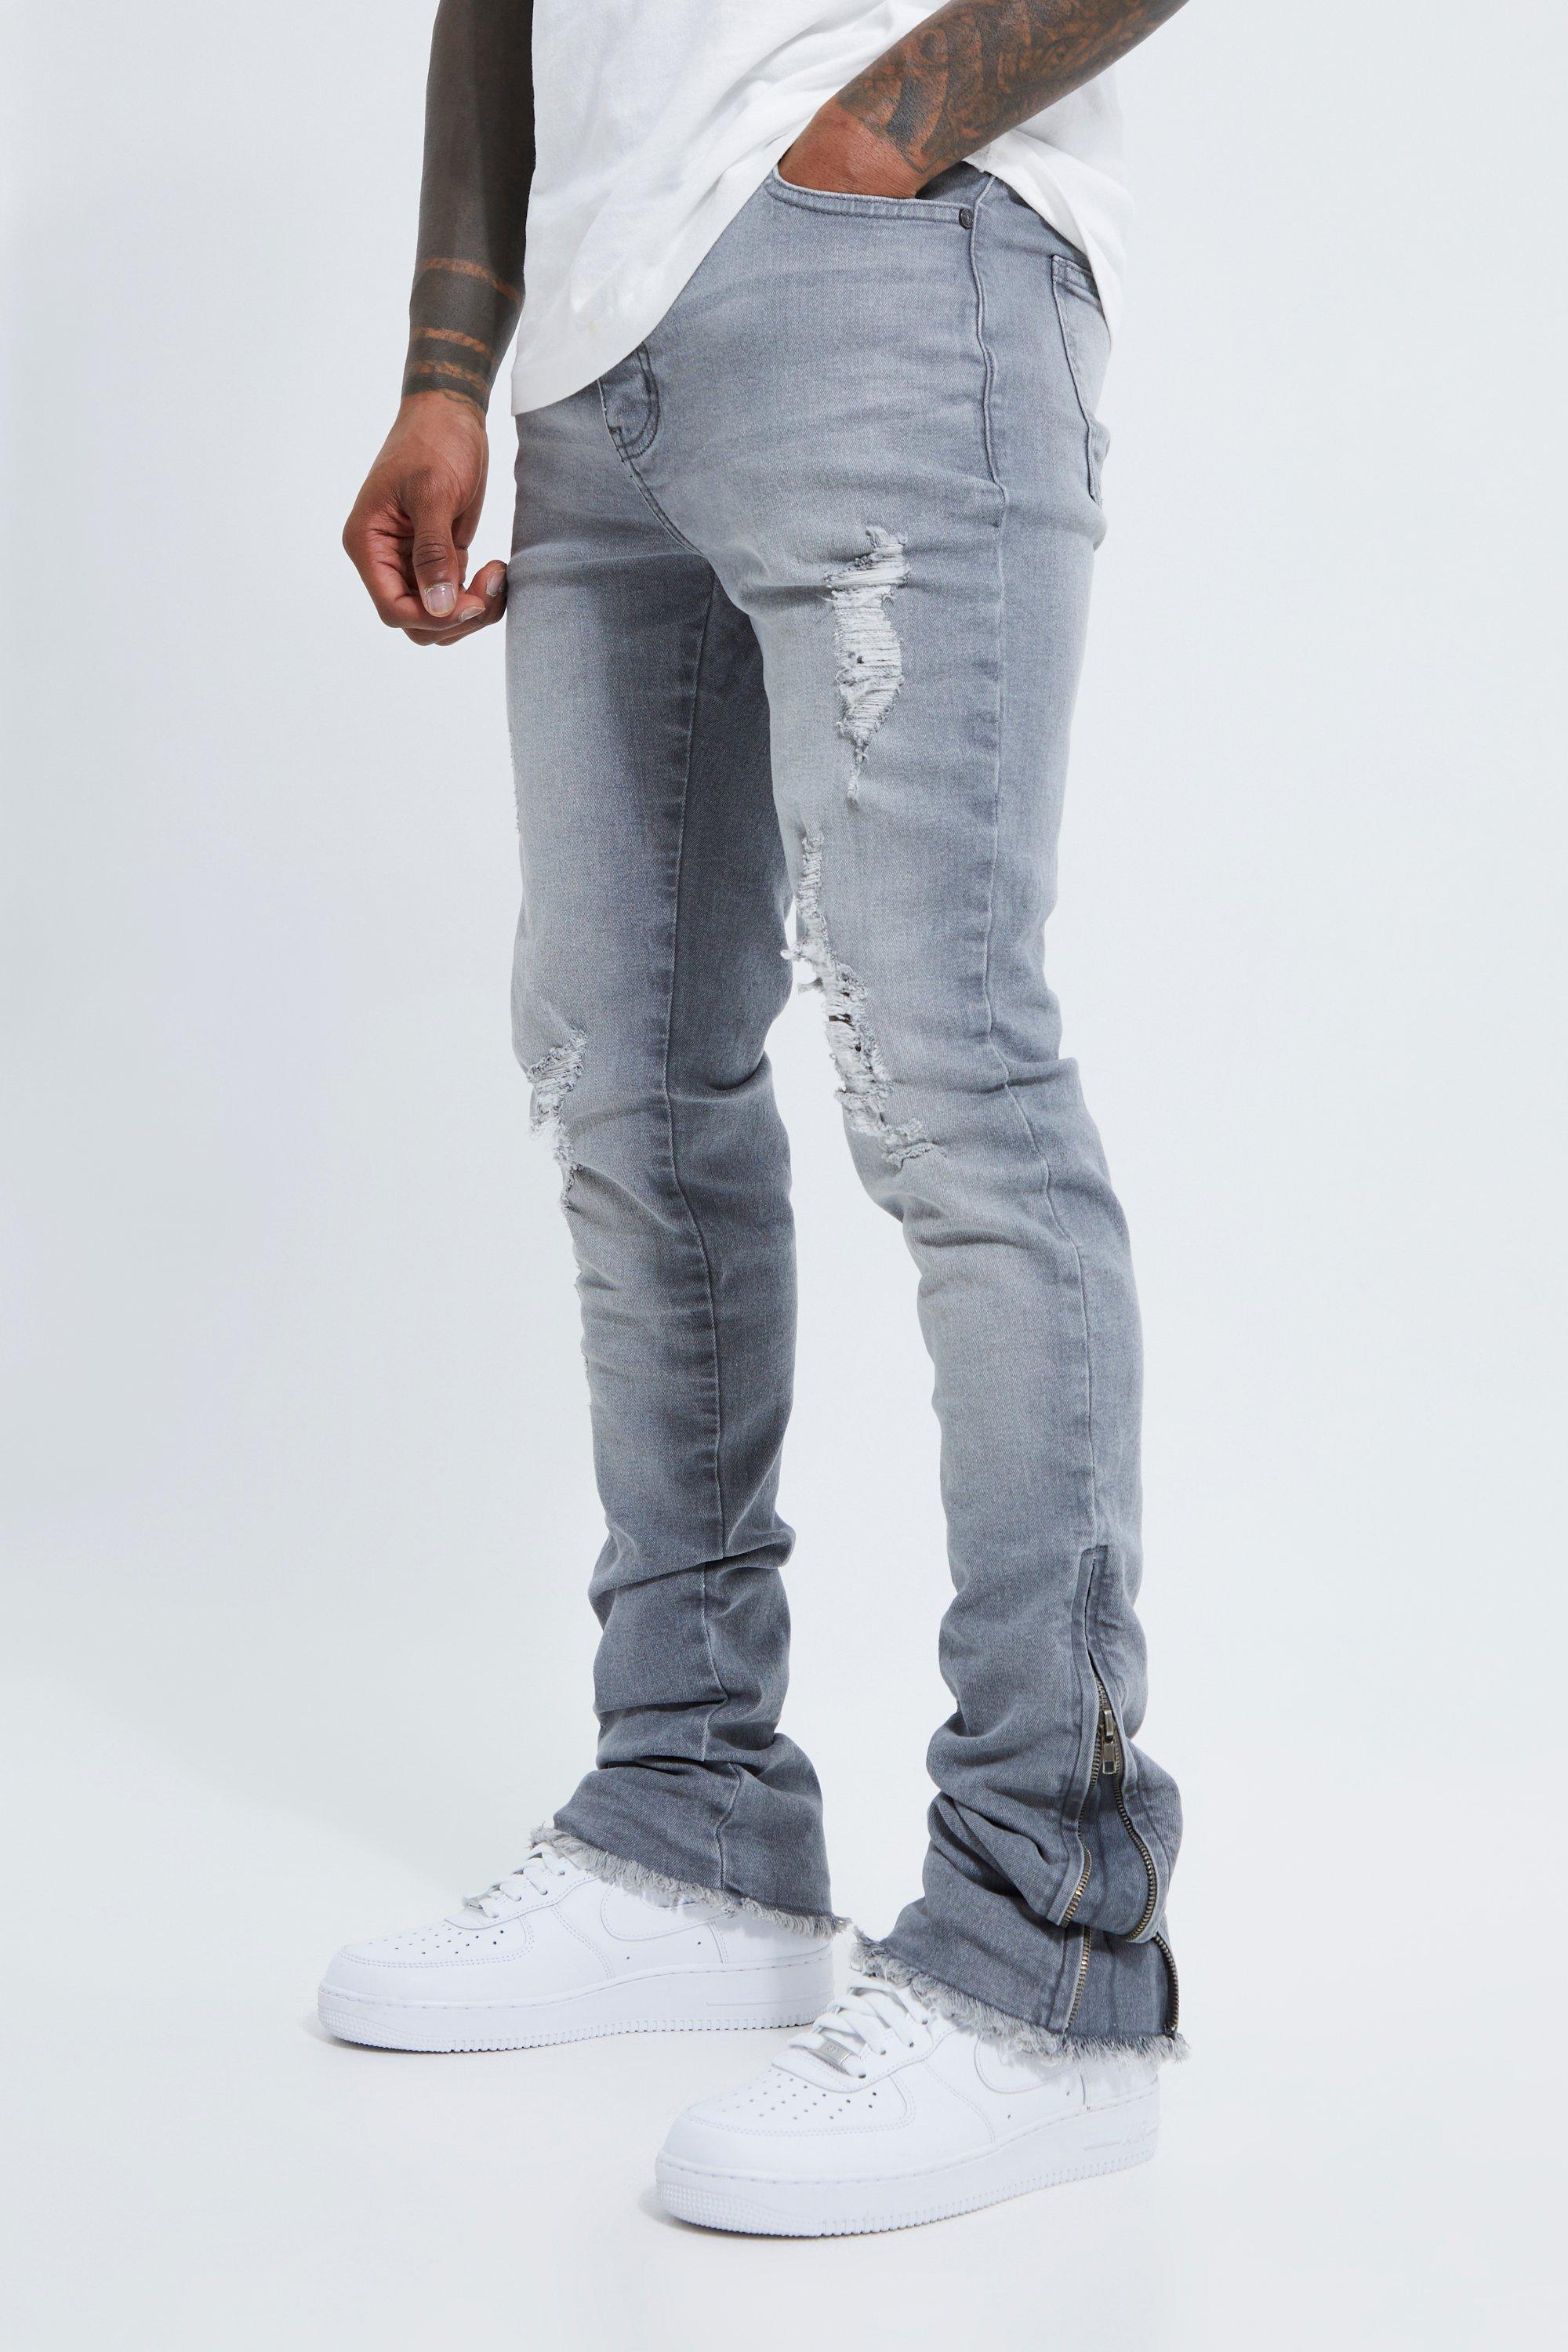 BoohooMAN Skinny Stretch Stacked Zip Gusset Rip Jeans in Blue for Men ...